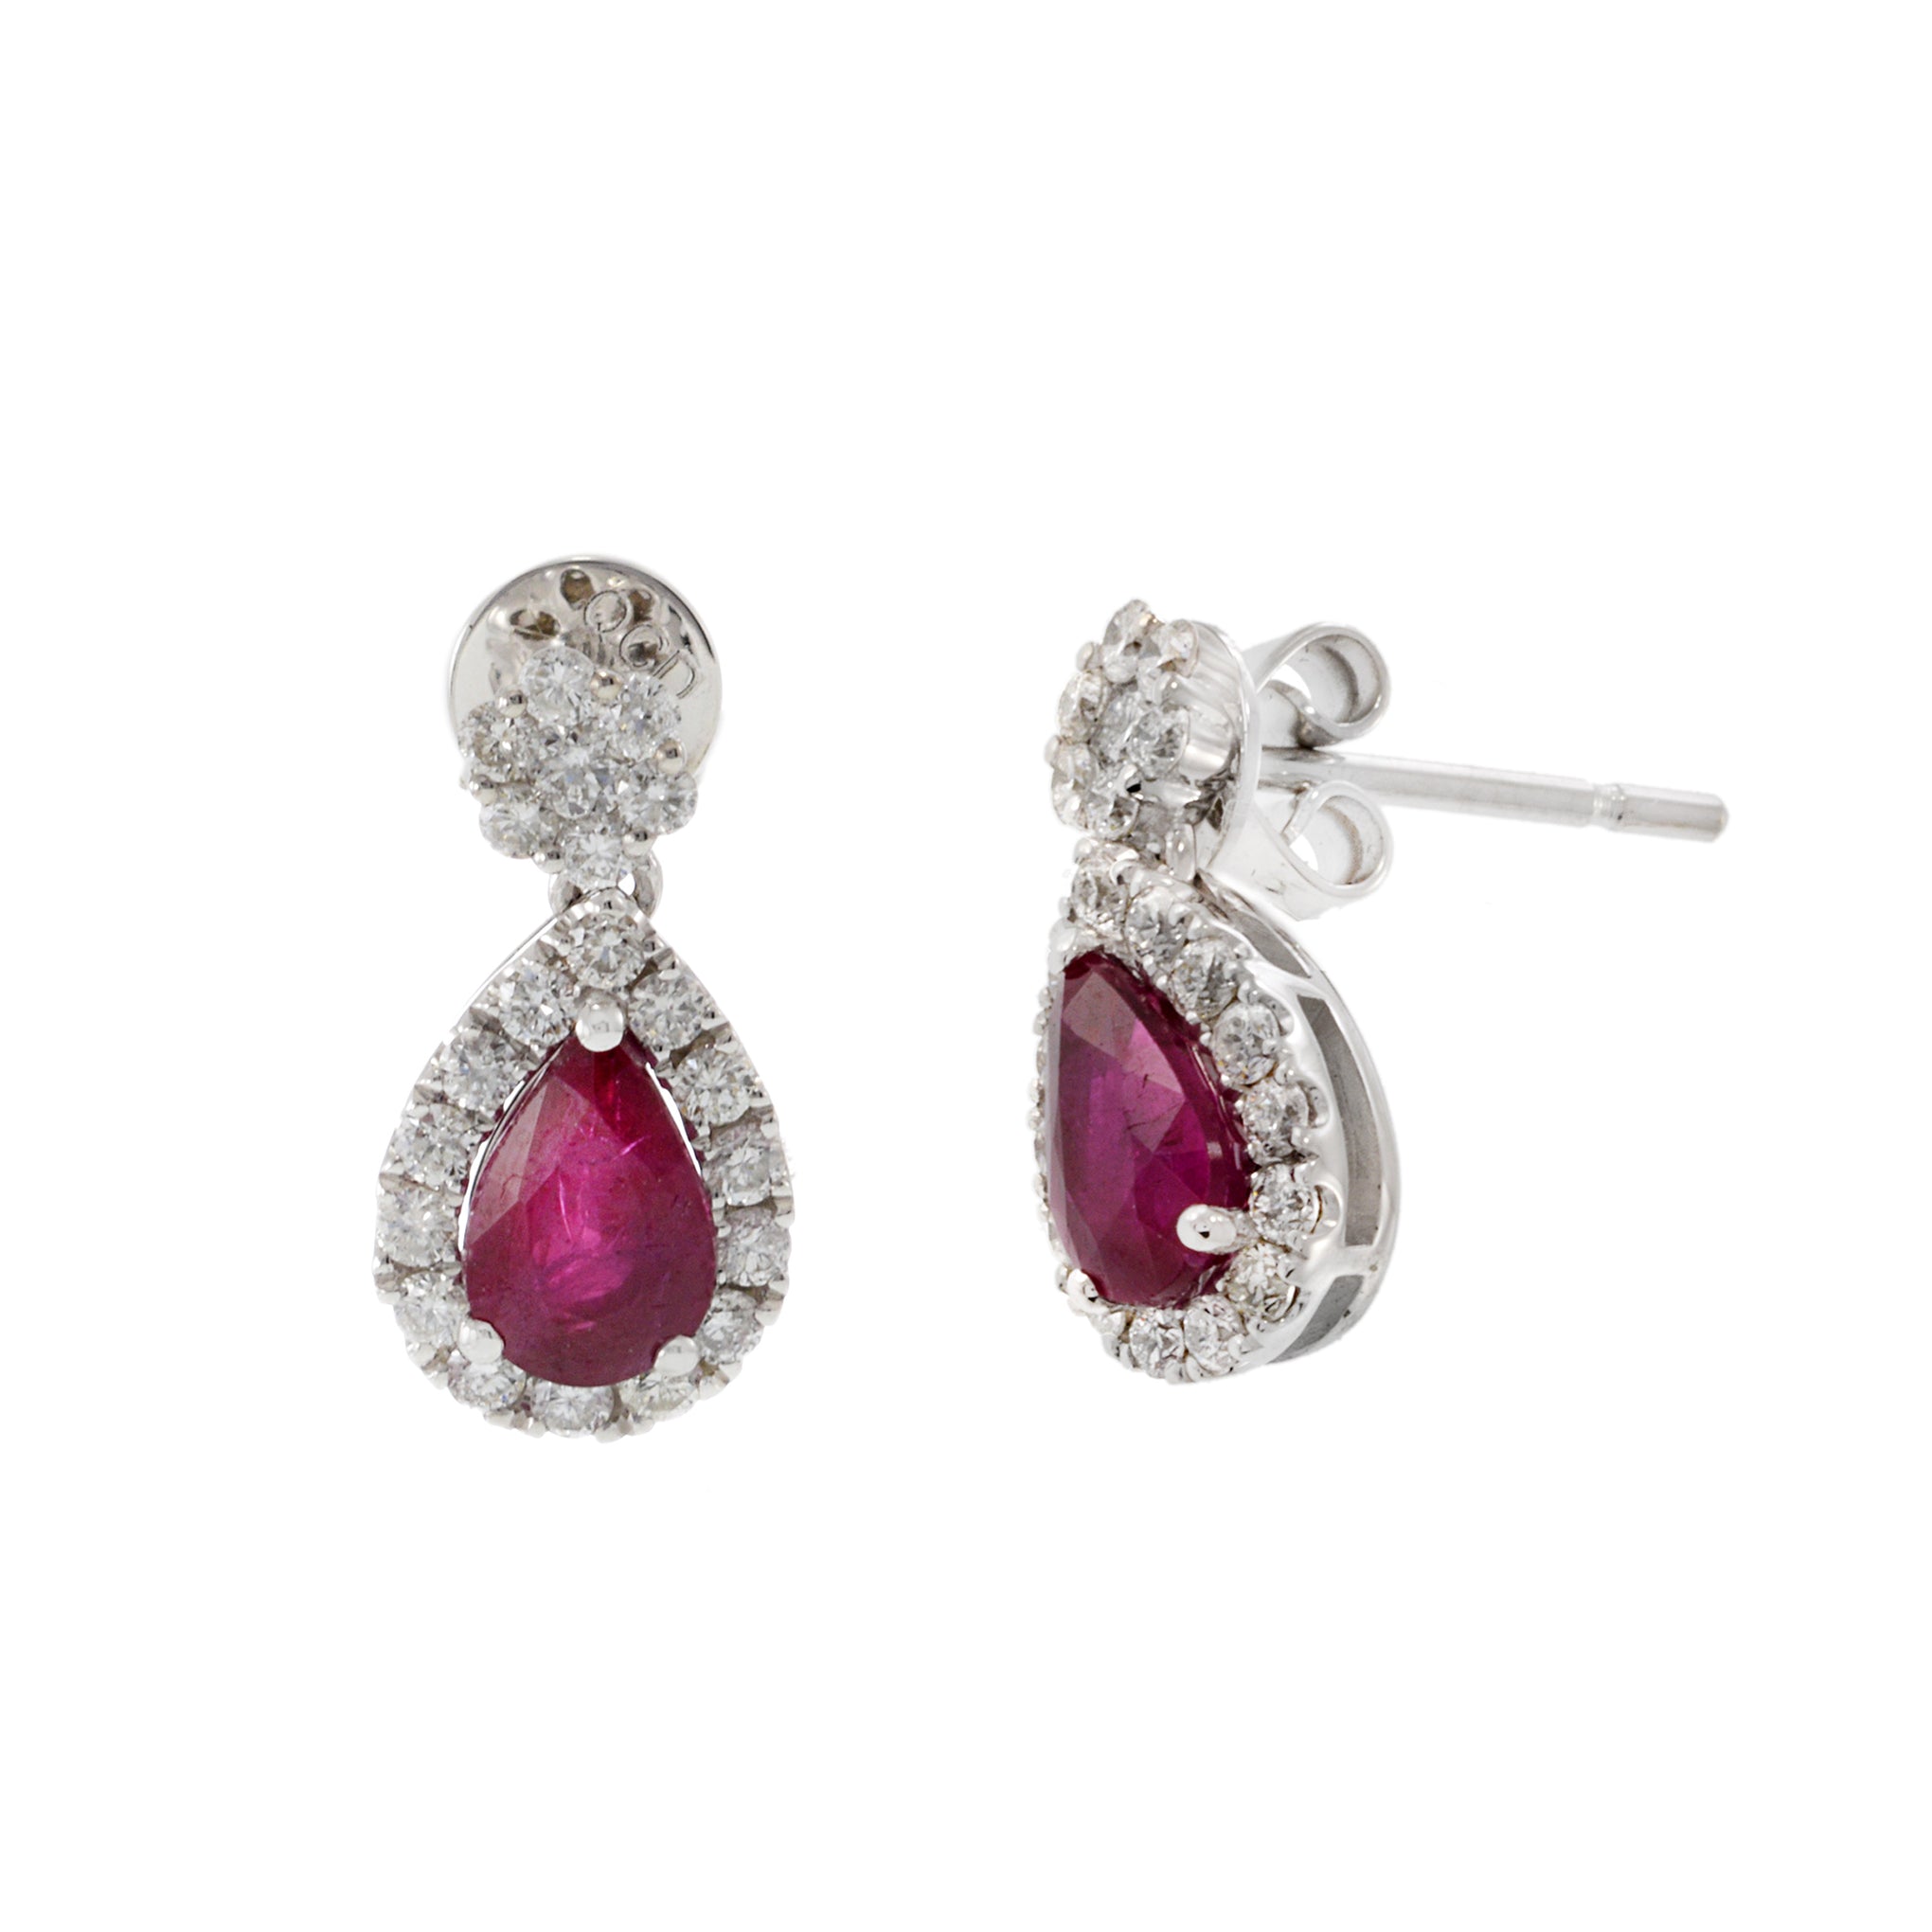 14KT White Gold Ruby and Diamond Earrings